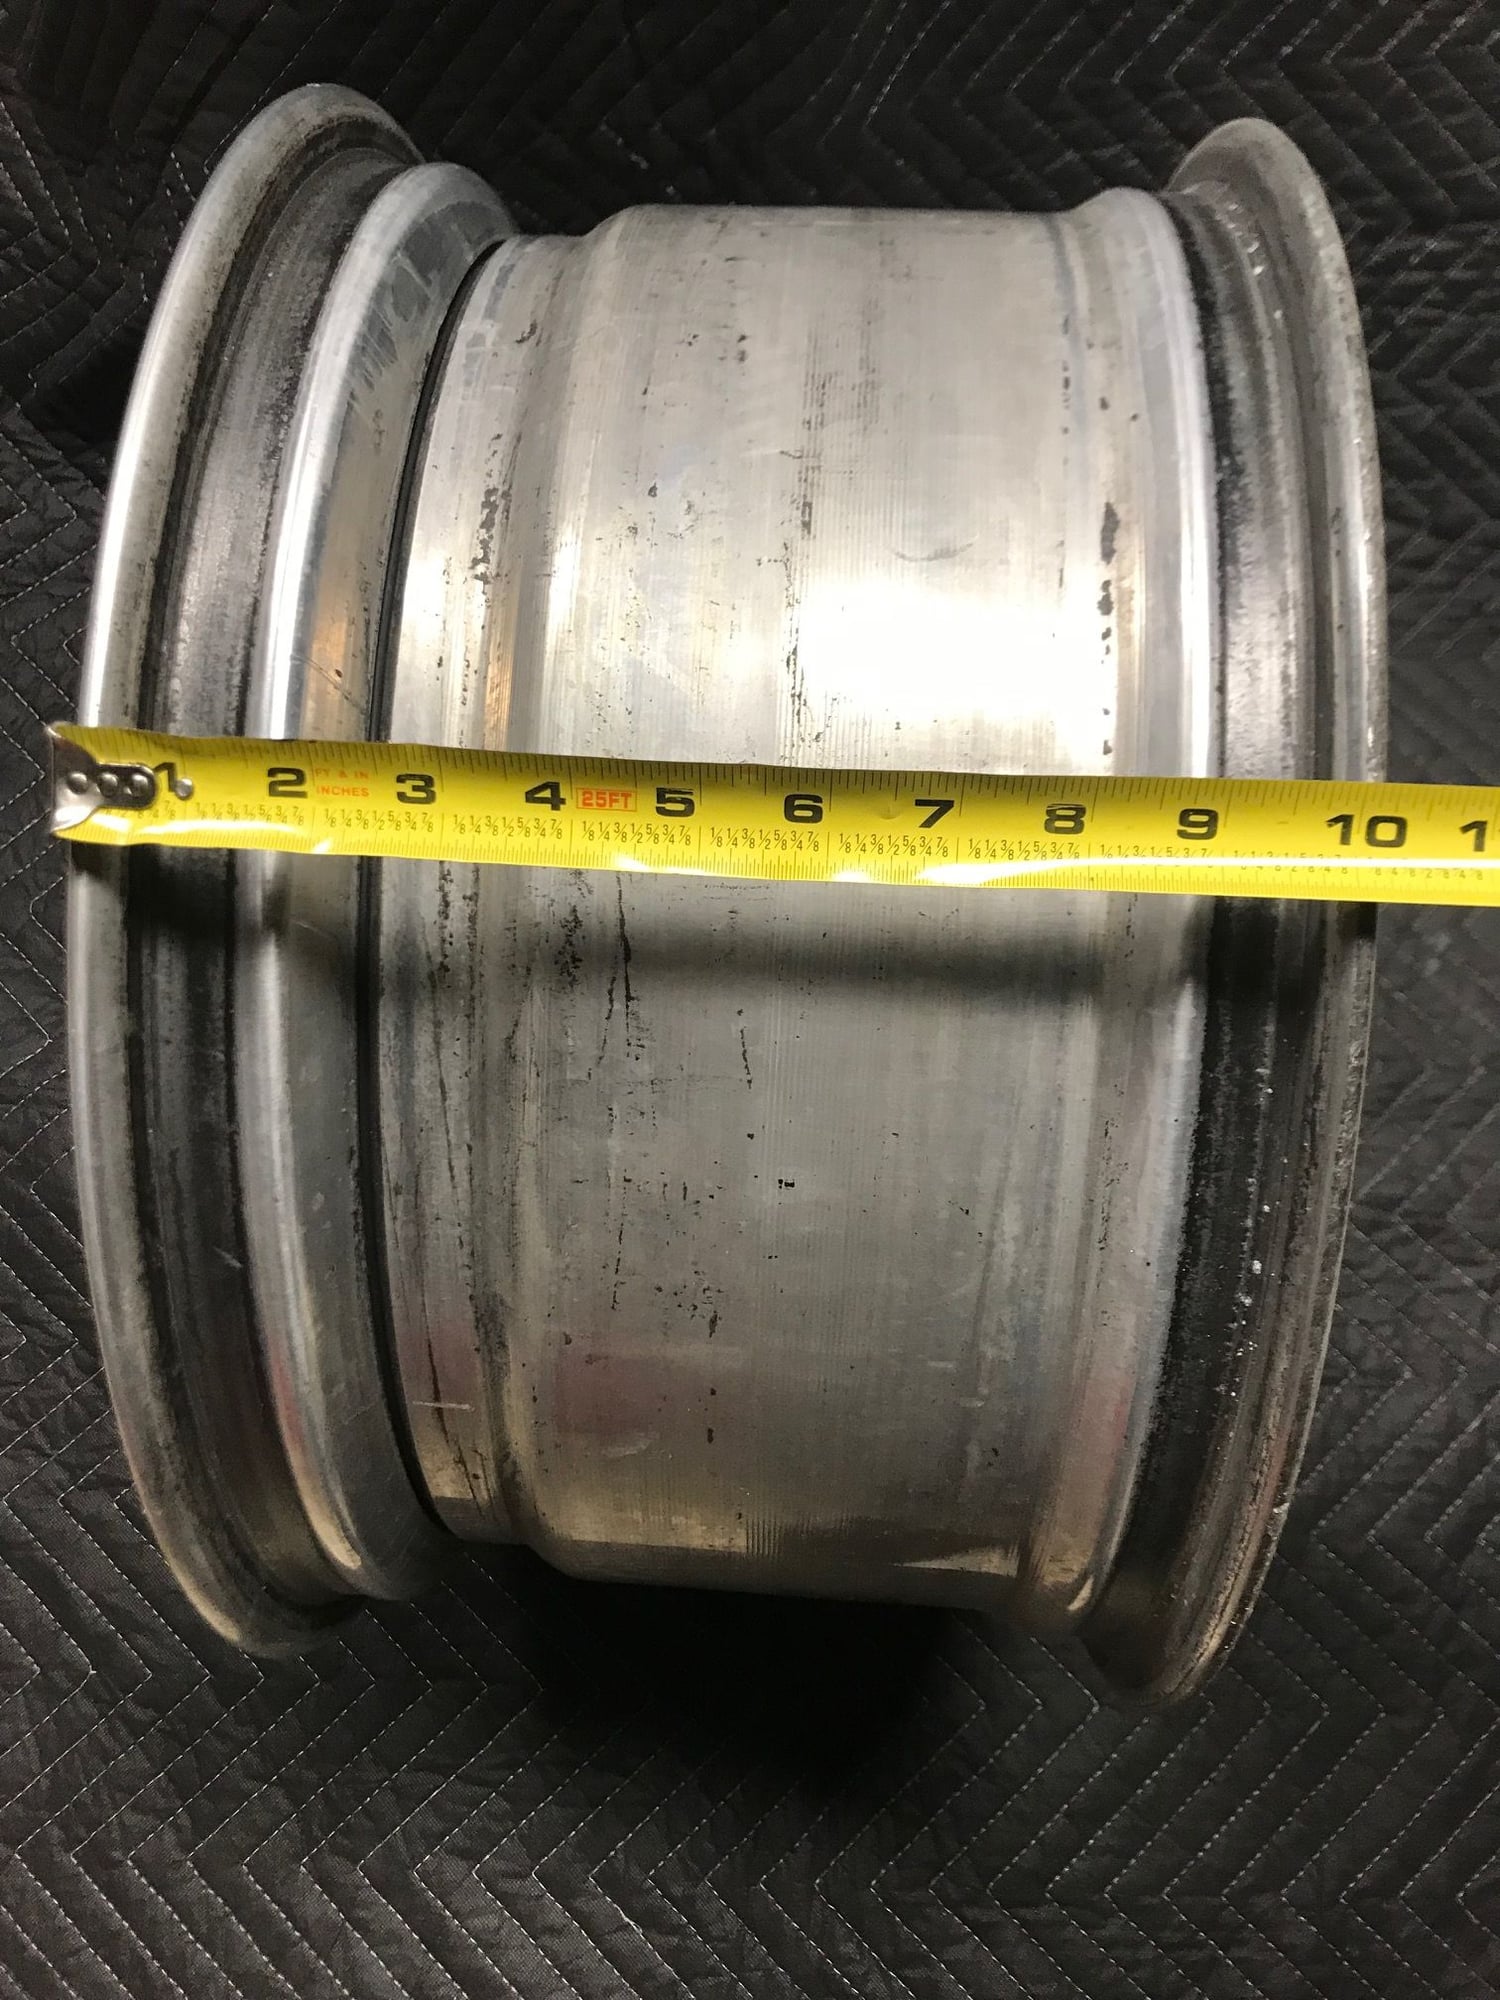 Wheels and Tires/Axles - 997.2 cup car wheels - Used - 2011 to 2012 Porsche 911 - Great Falls, VA 22066, United States